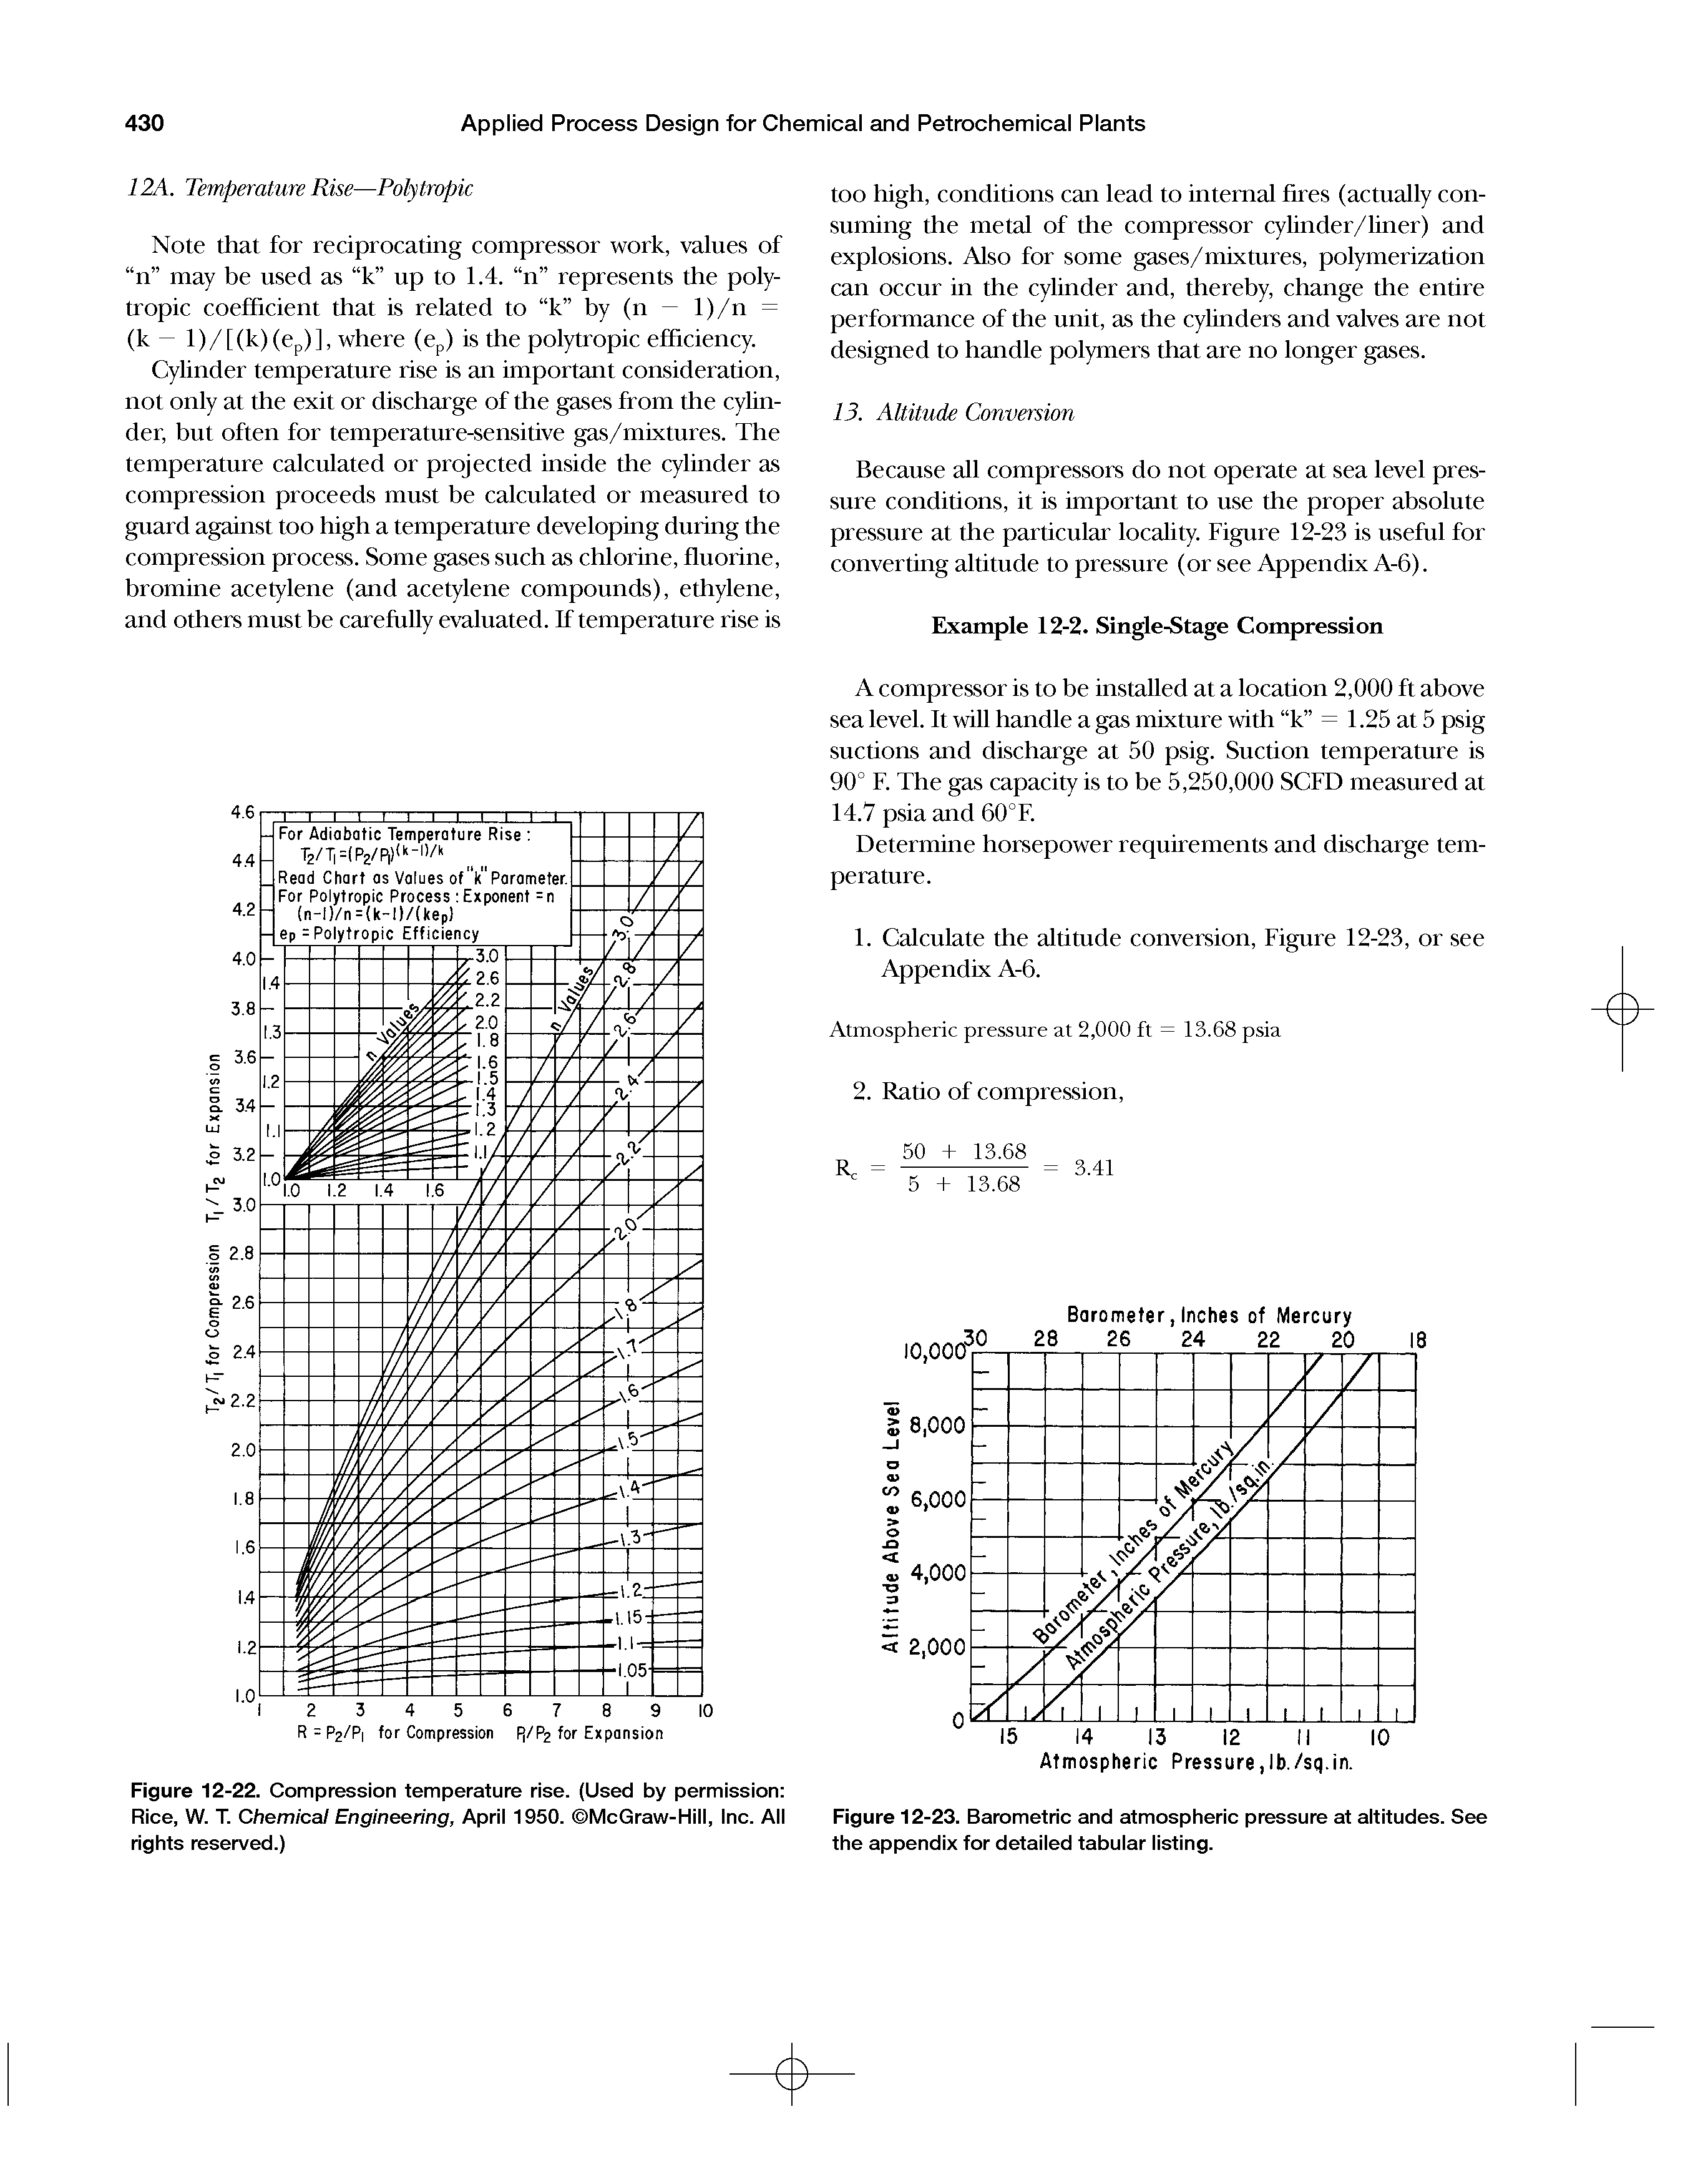 Figure 12-23. Barometric and atmospheric pressure at altitudes. See the appendix for detailed tabular listing.